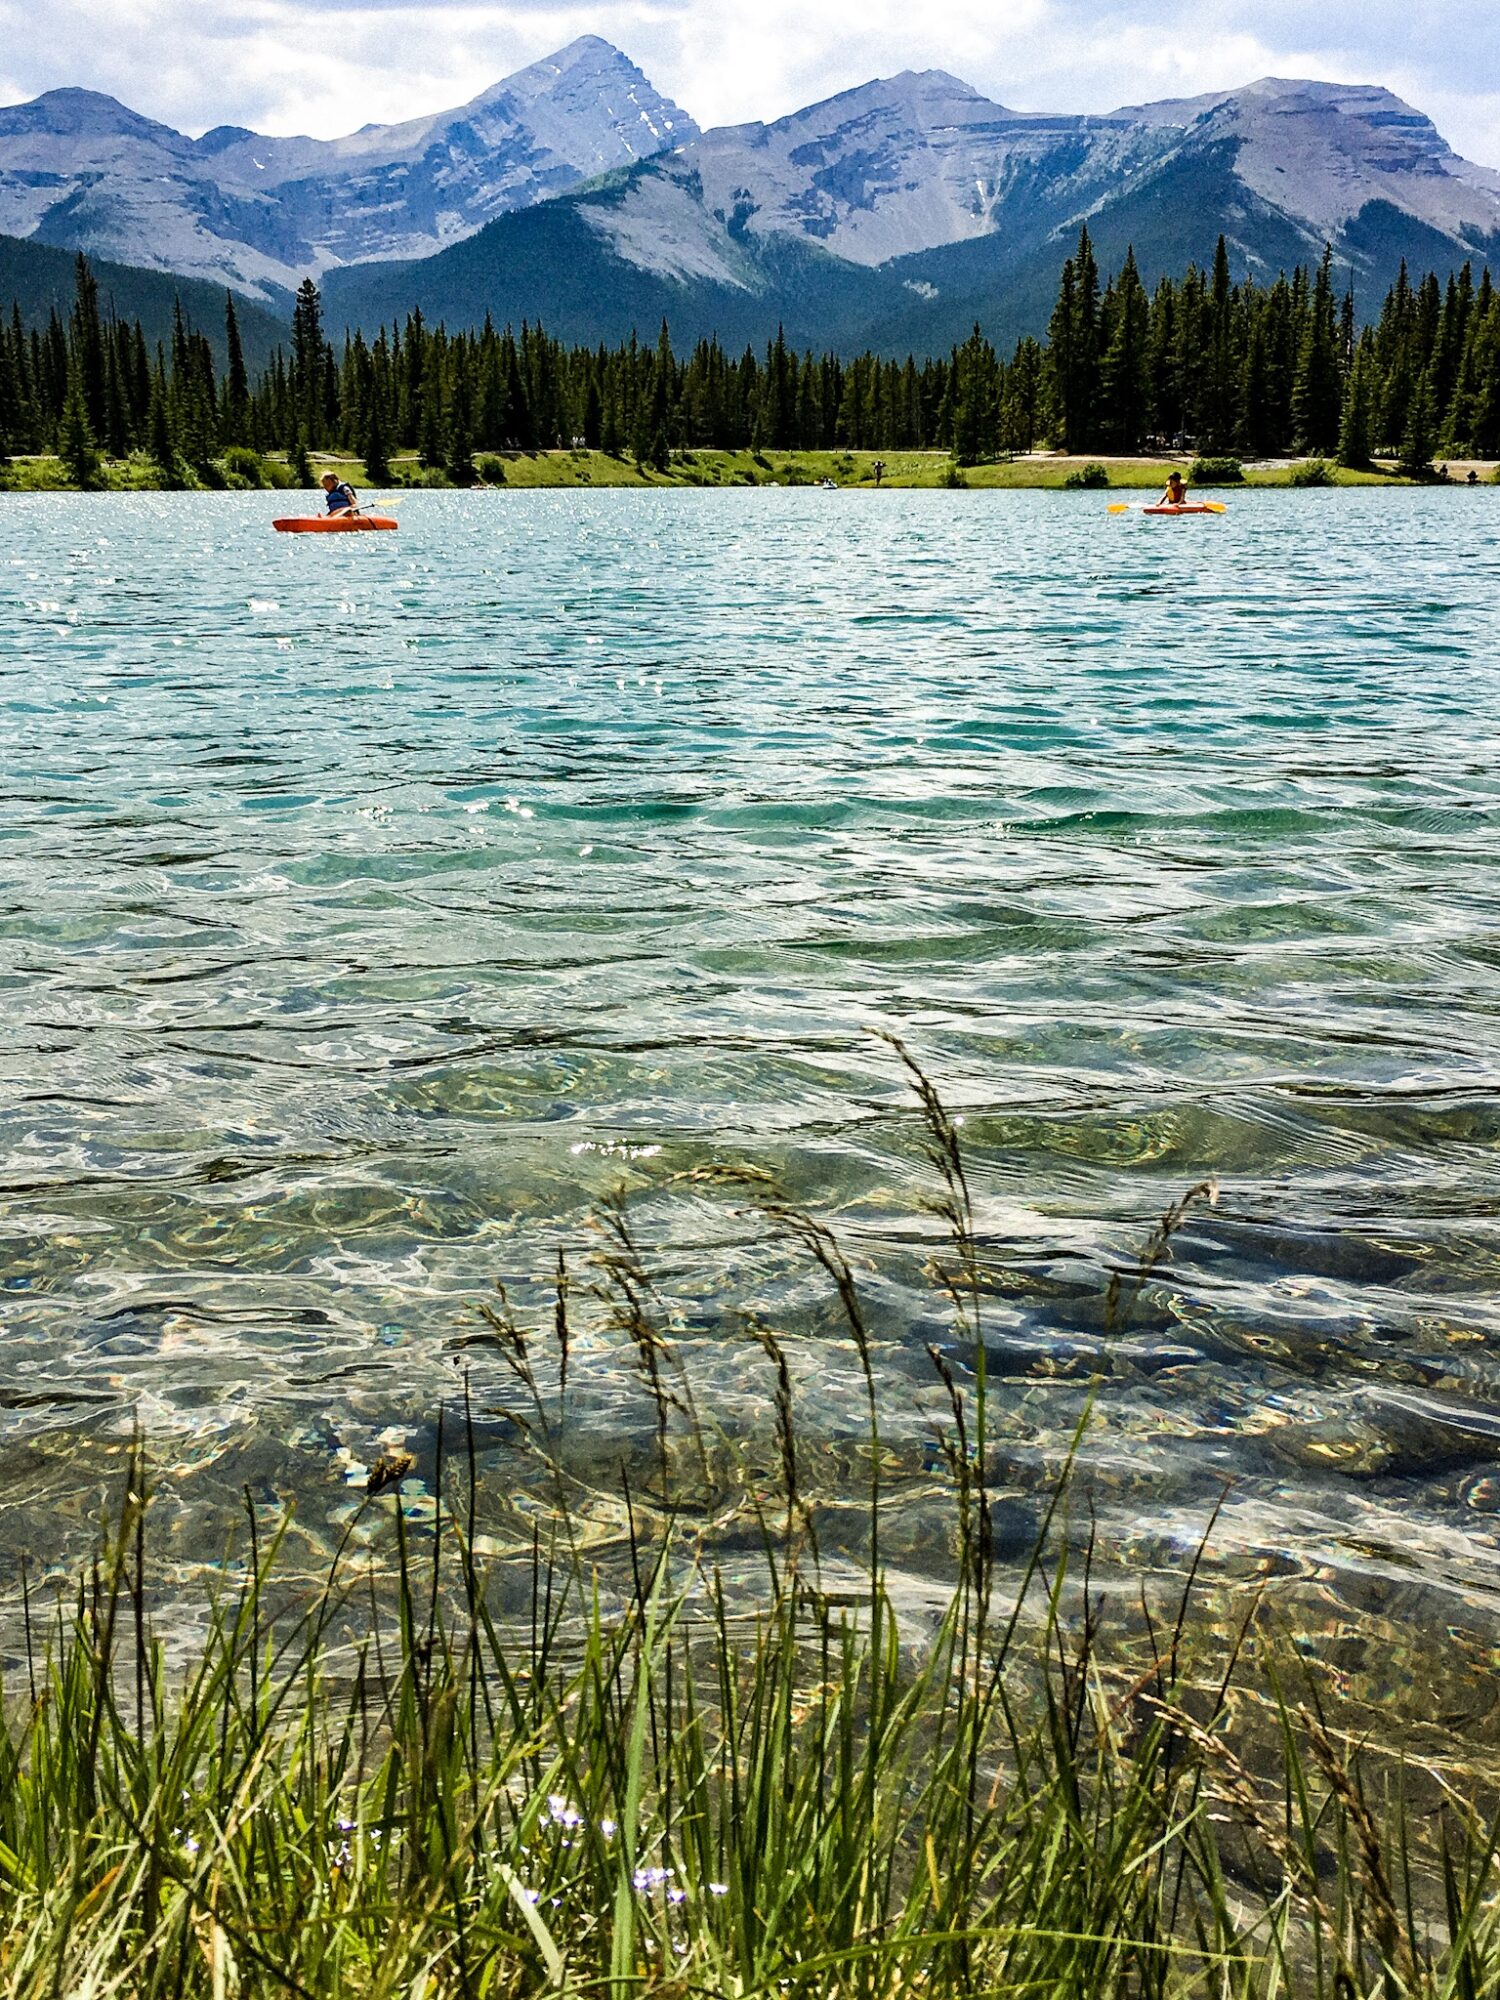 people paddling on forget me not pond in alberta